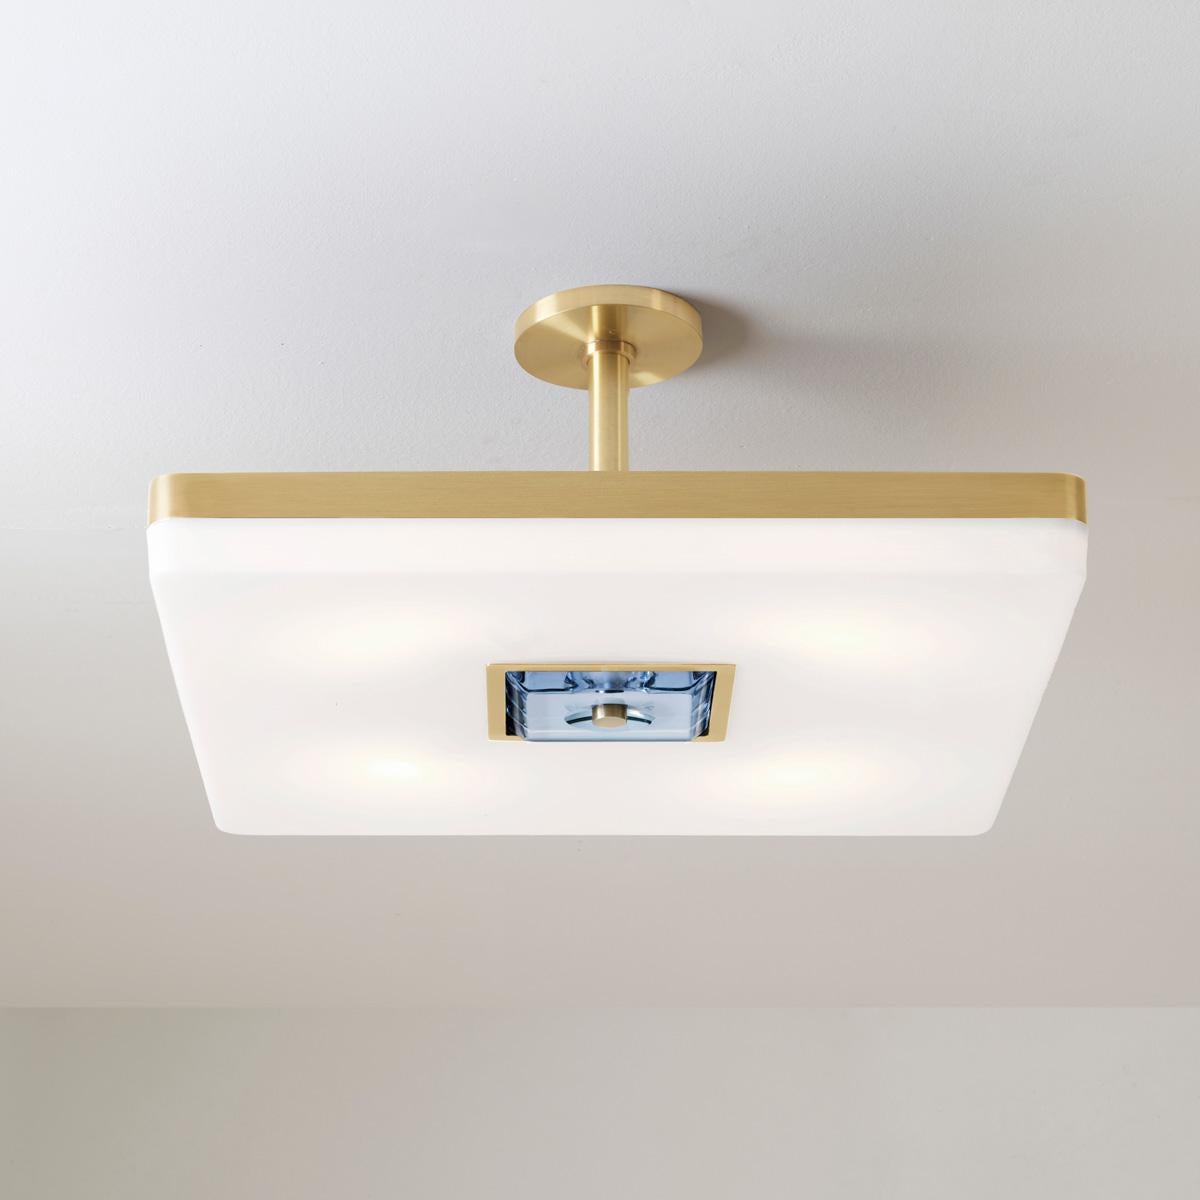 Brass Iris Square Ceiling Light by Gaspare Asaro. Bronze Finish For Sale